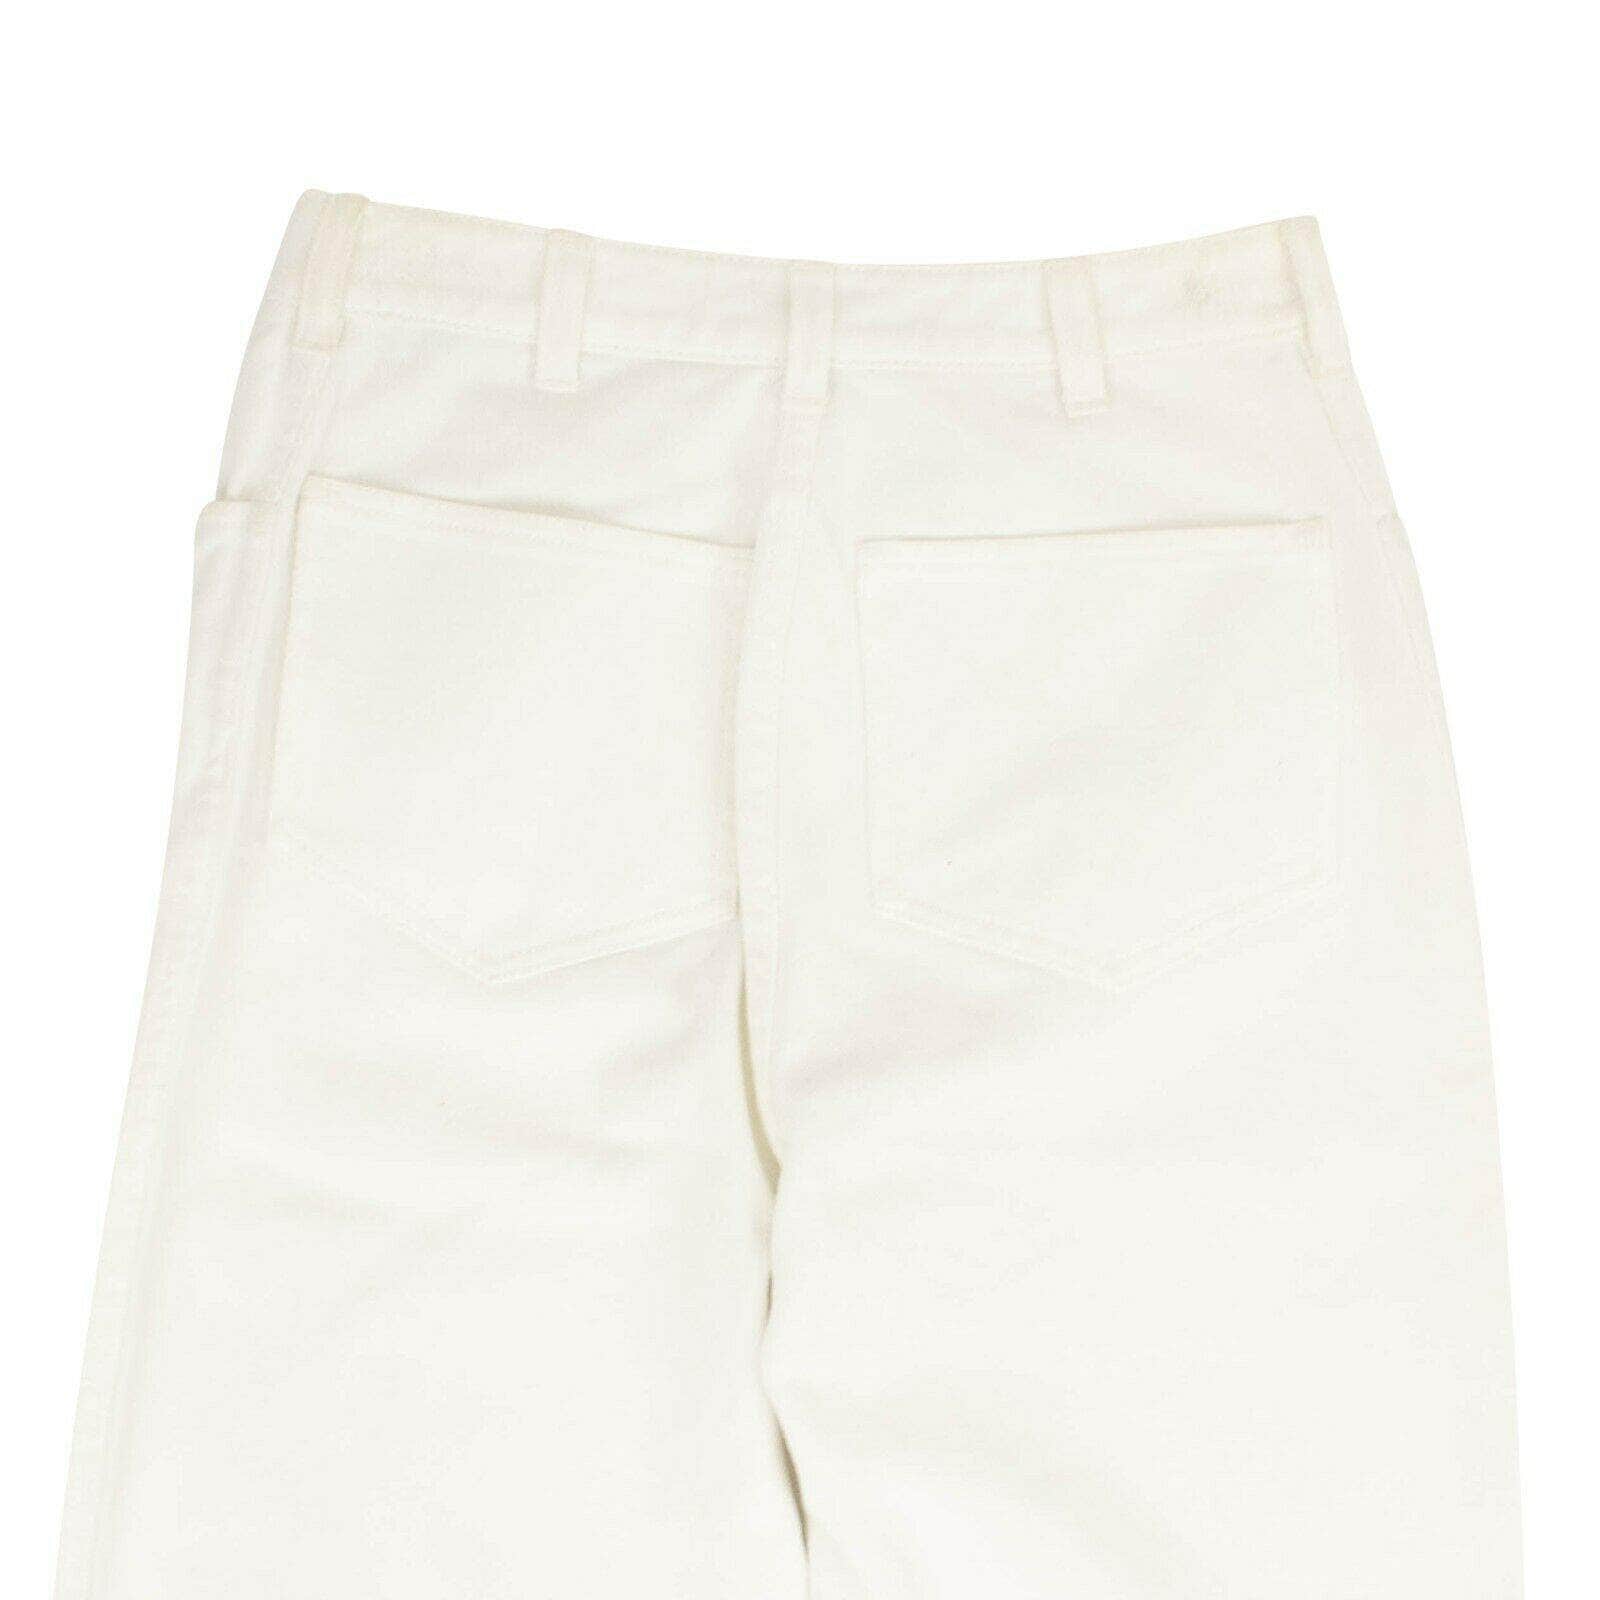 A_PLAN_APPLICATION a_plan_application, channelenable-all, couponcollection, gender-womens, main-clothing, size-27, under-250 27 White Denim Mid Rise Straight Jeans 82NGG-AP-45/27 82NGG-AP-45/27